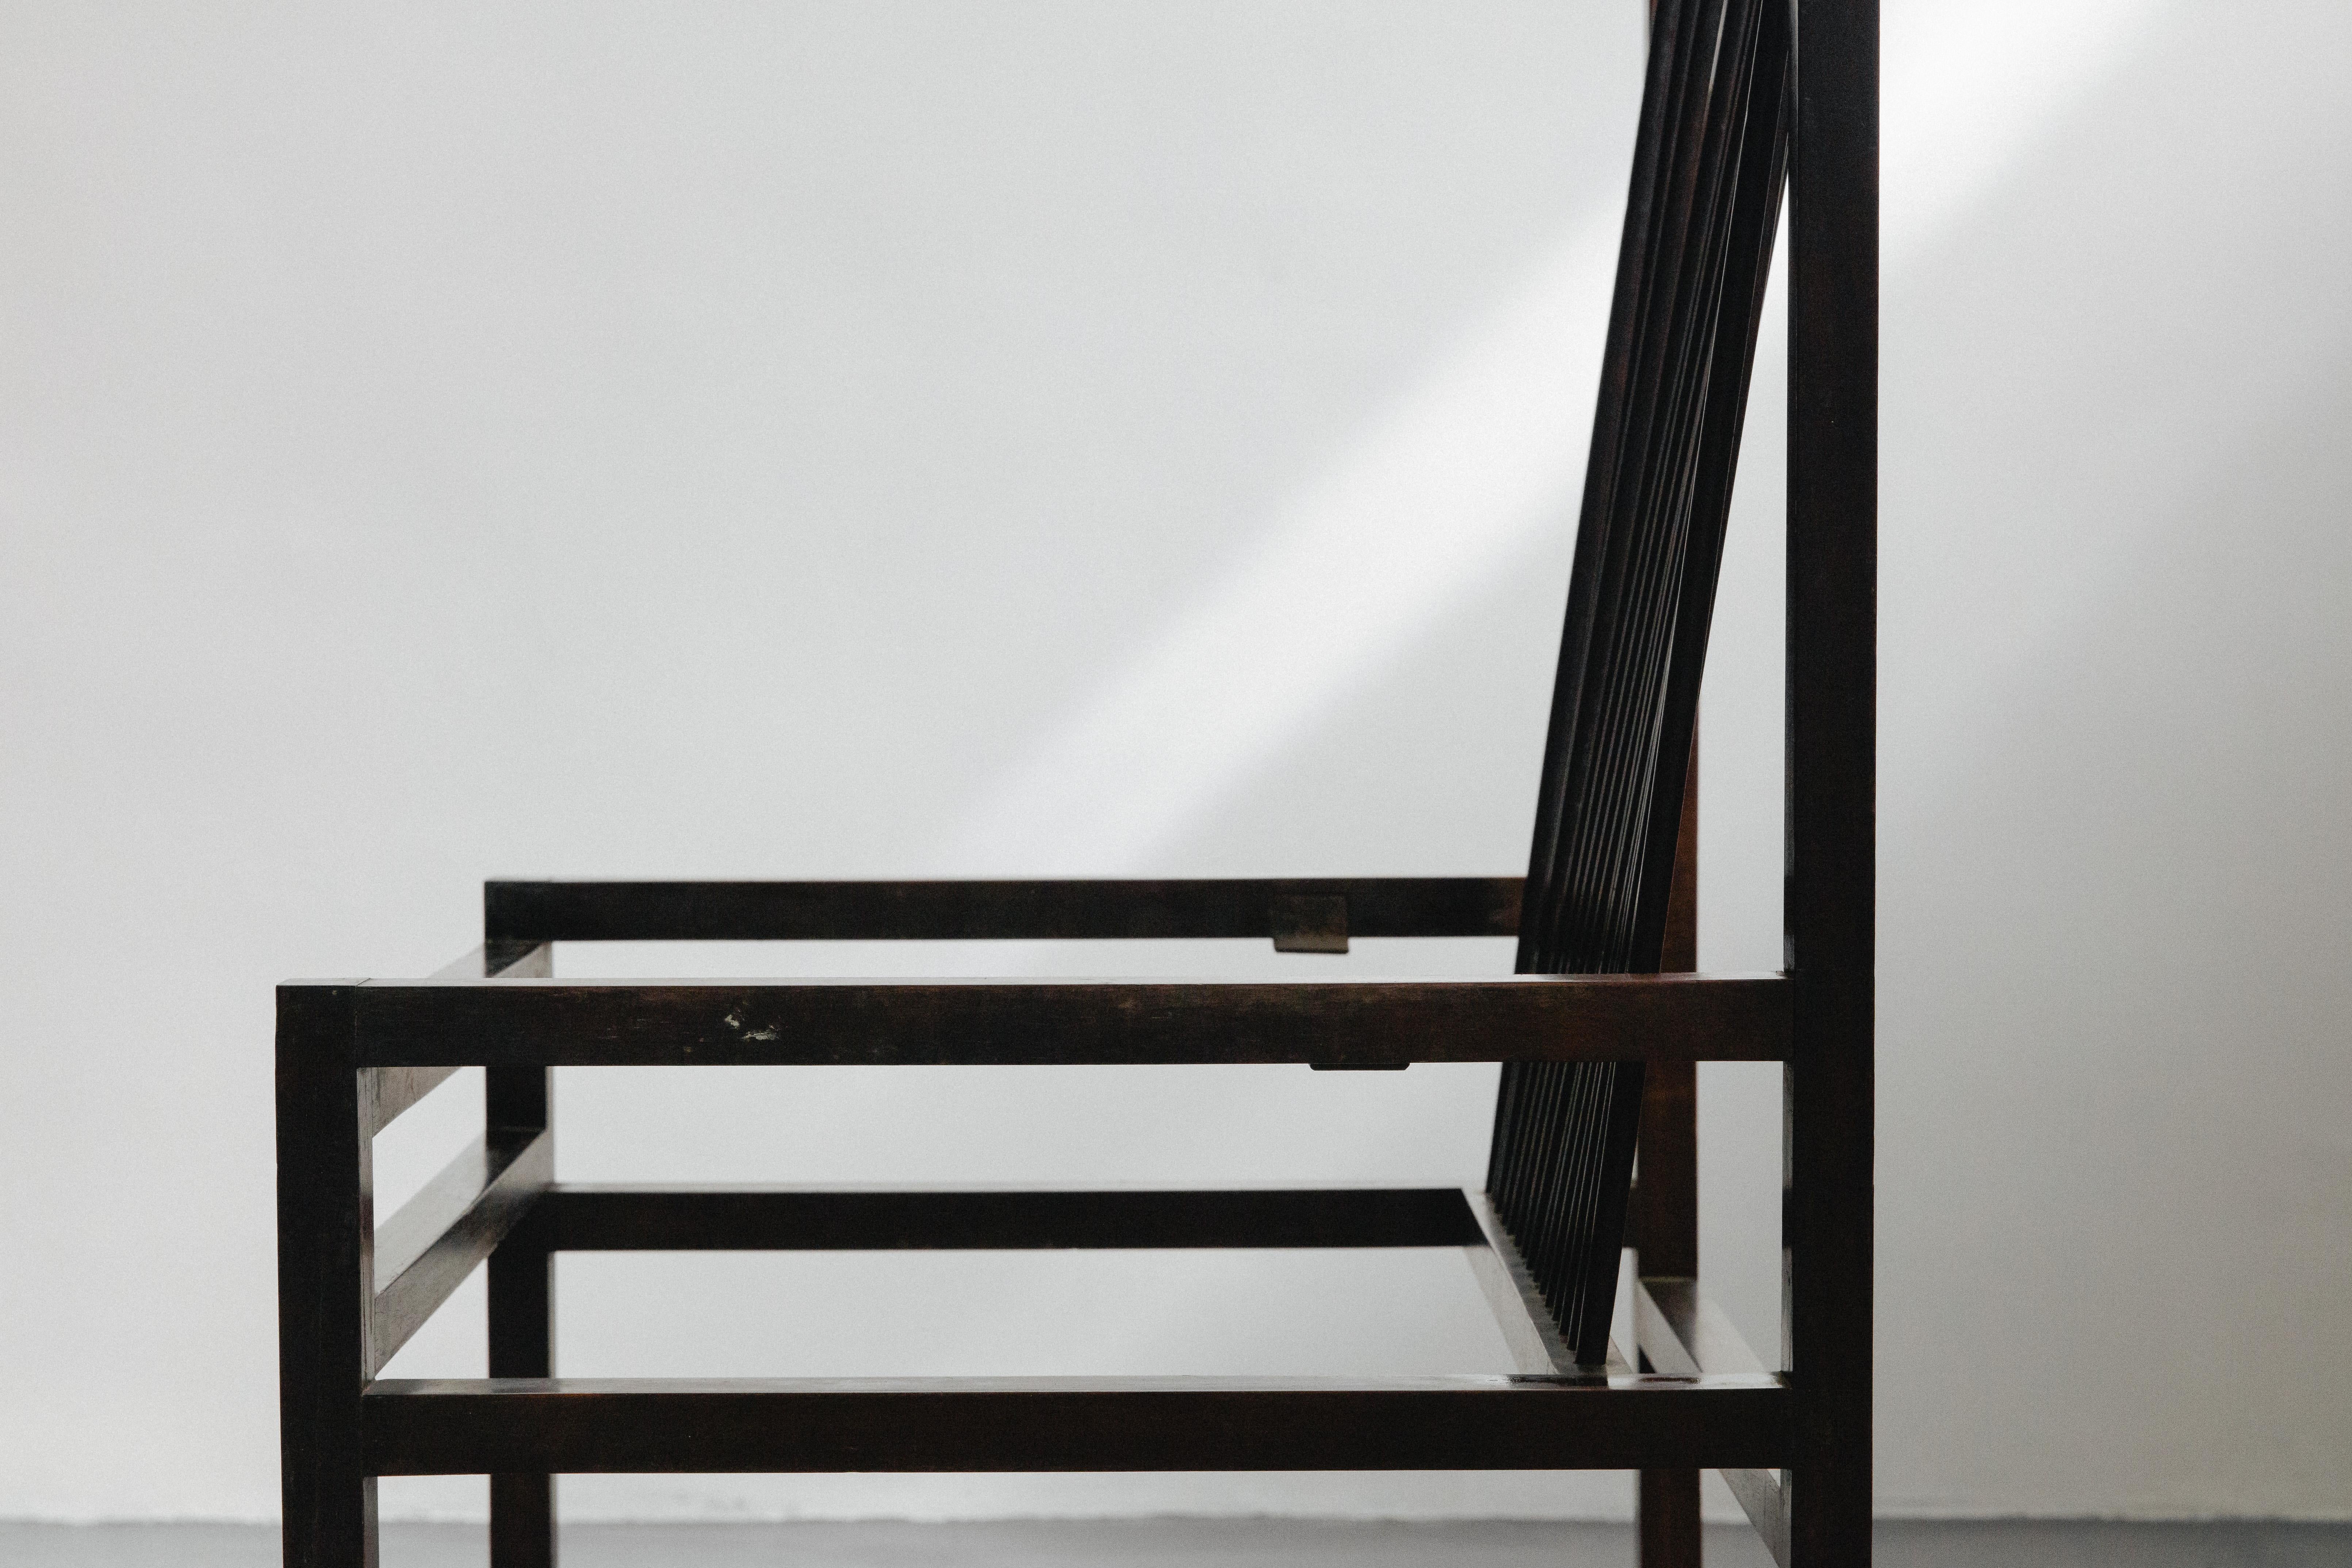 To compose light seats, Tenreiro used thin wooden sticks in some of his chairs. One of these pieces, which became well known, was the Structural Chair.

Created in 1947 in two versions, one with a cane seat and another upholstered, the Structural